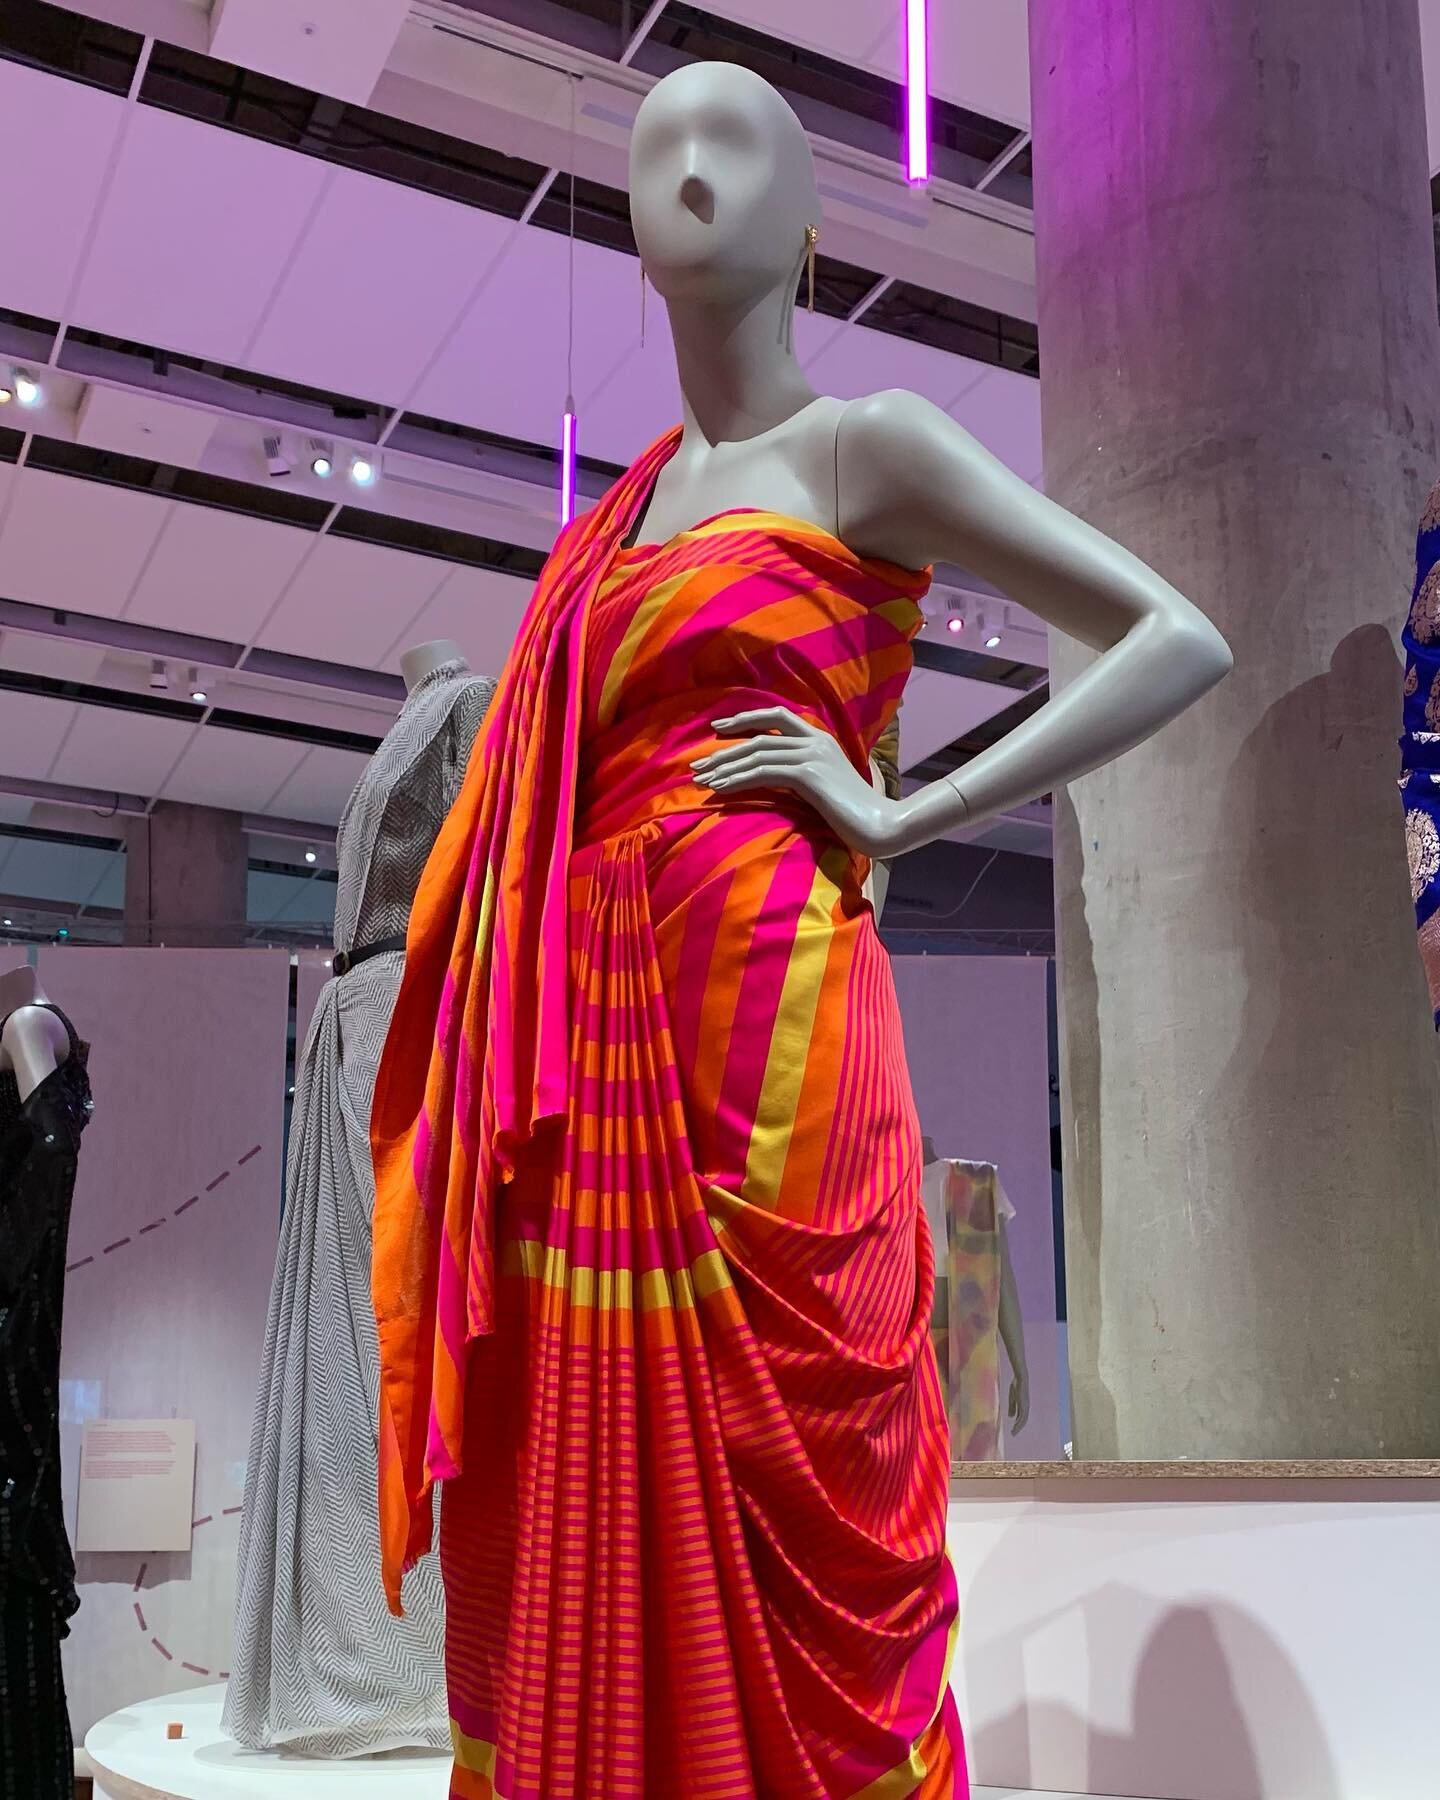 An exquisite exploration of the modern sari

I&rsquo;ve always acknowledged saris as an elegant and traditional outfit within South Asian culture, but as someone who grew up in Britain, and predominately leaned towards Western and Indo-Western wear, 